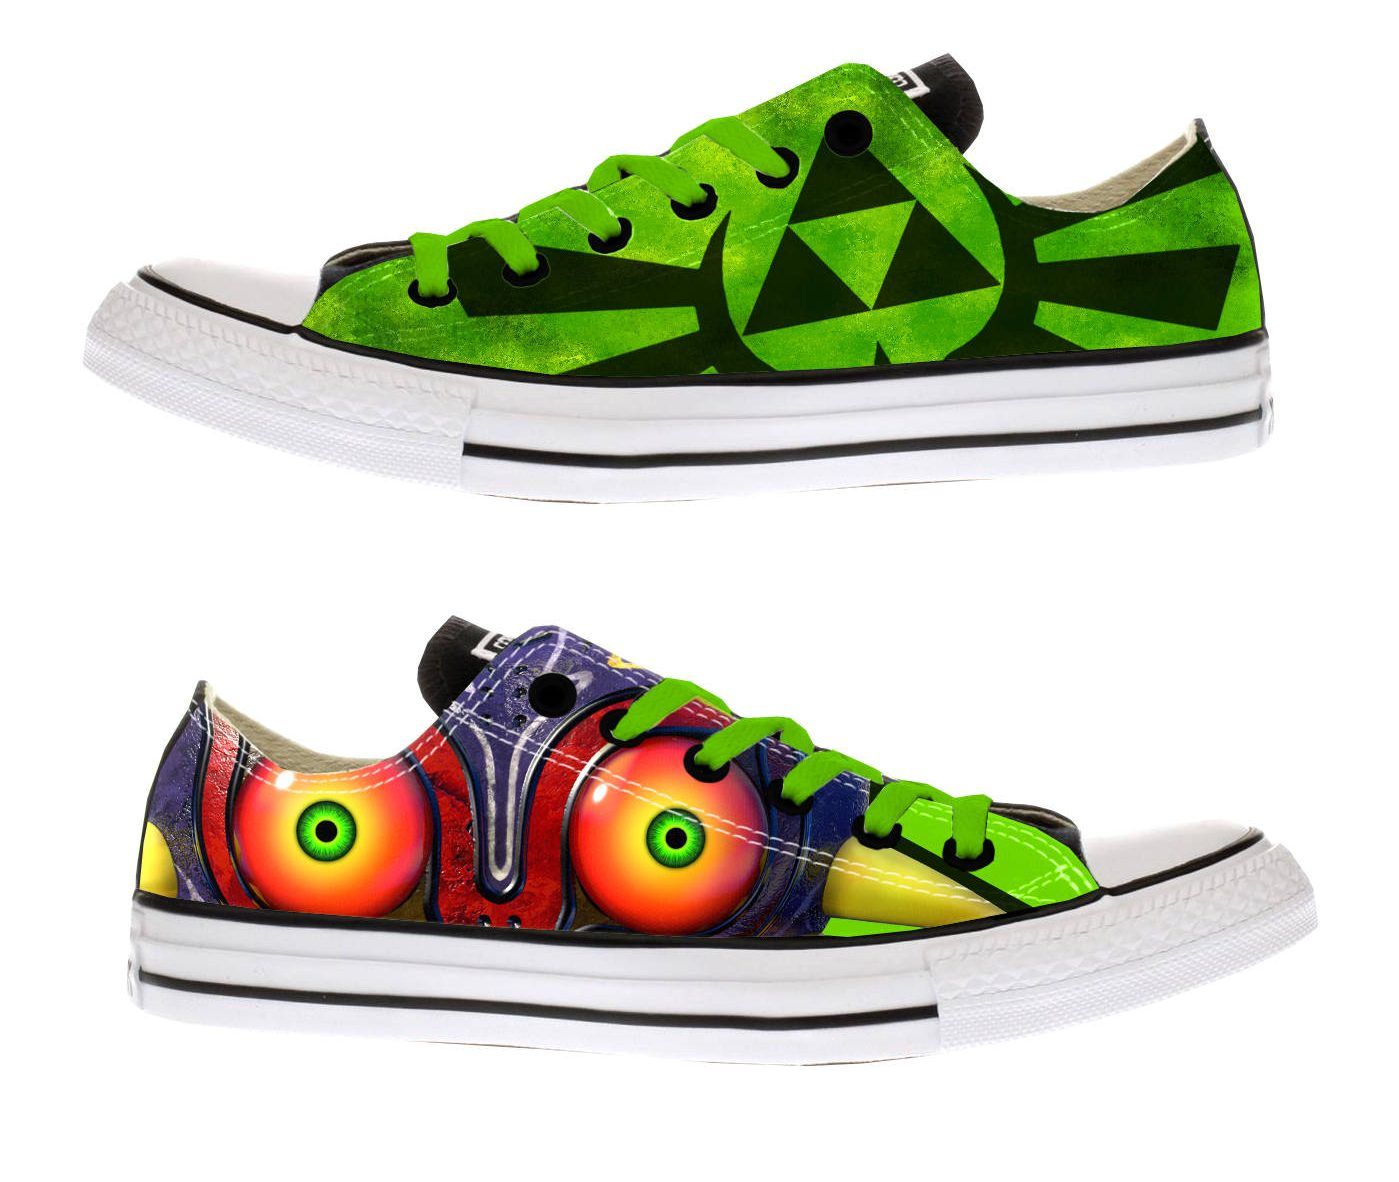 15 Crazy Video Game Shoes We Need (And 15 That Are Just Embarrassing)